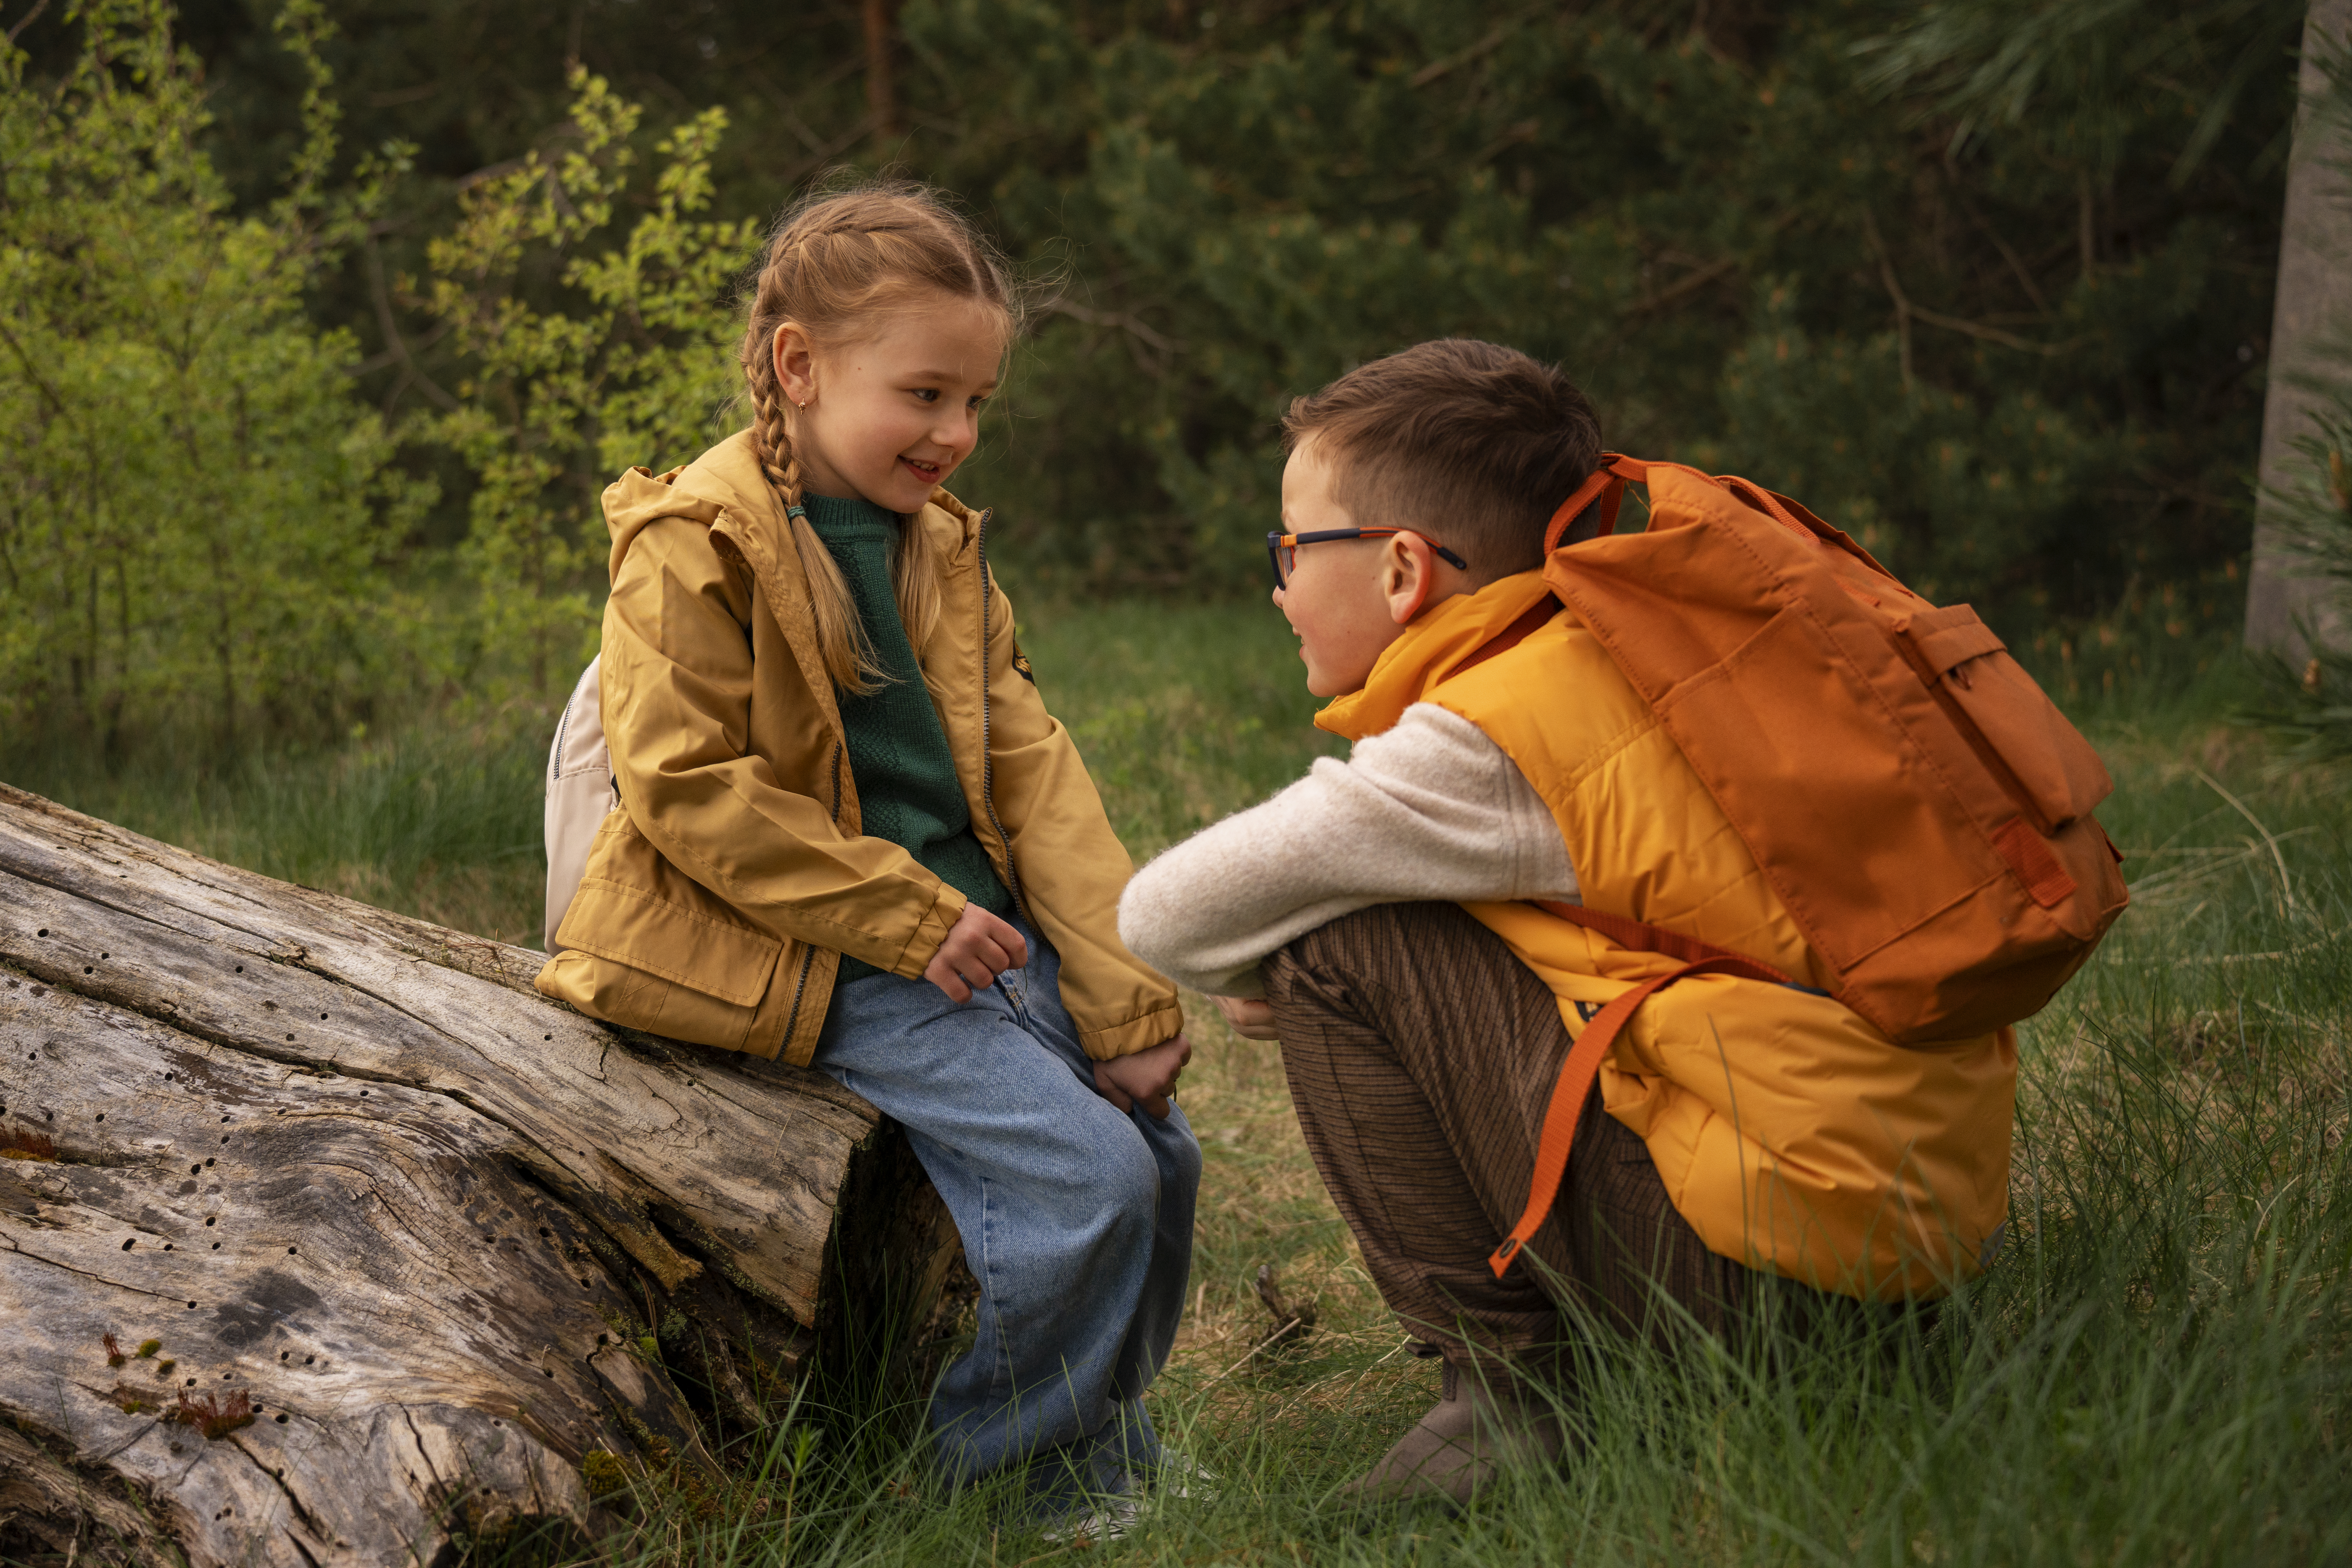 view little kids with backpacks spending time nature outdoors